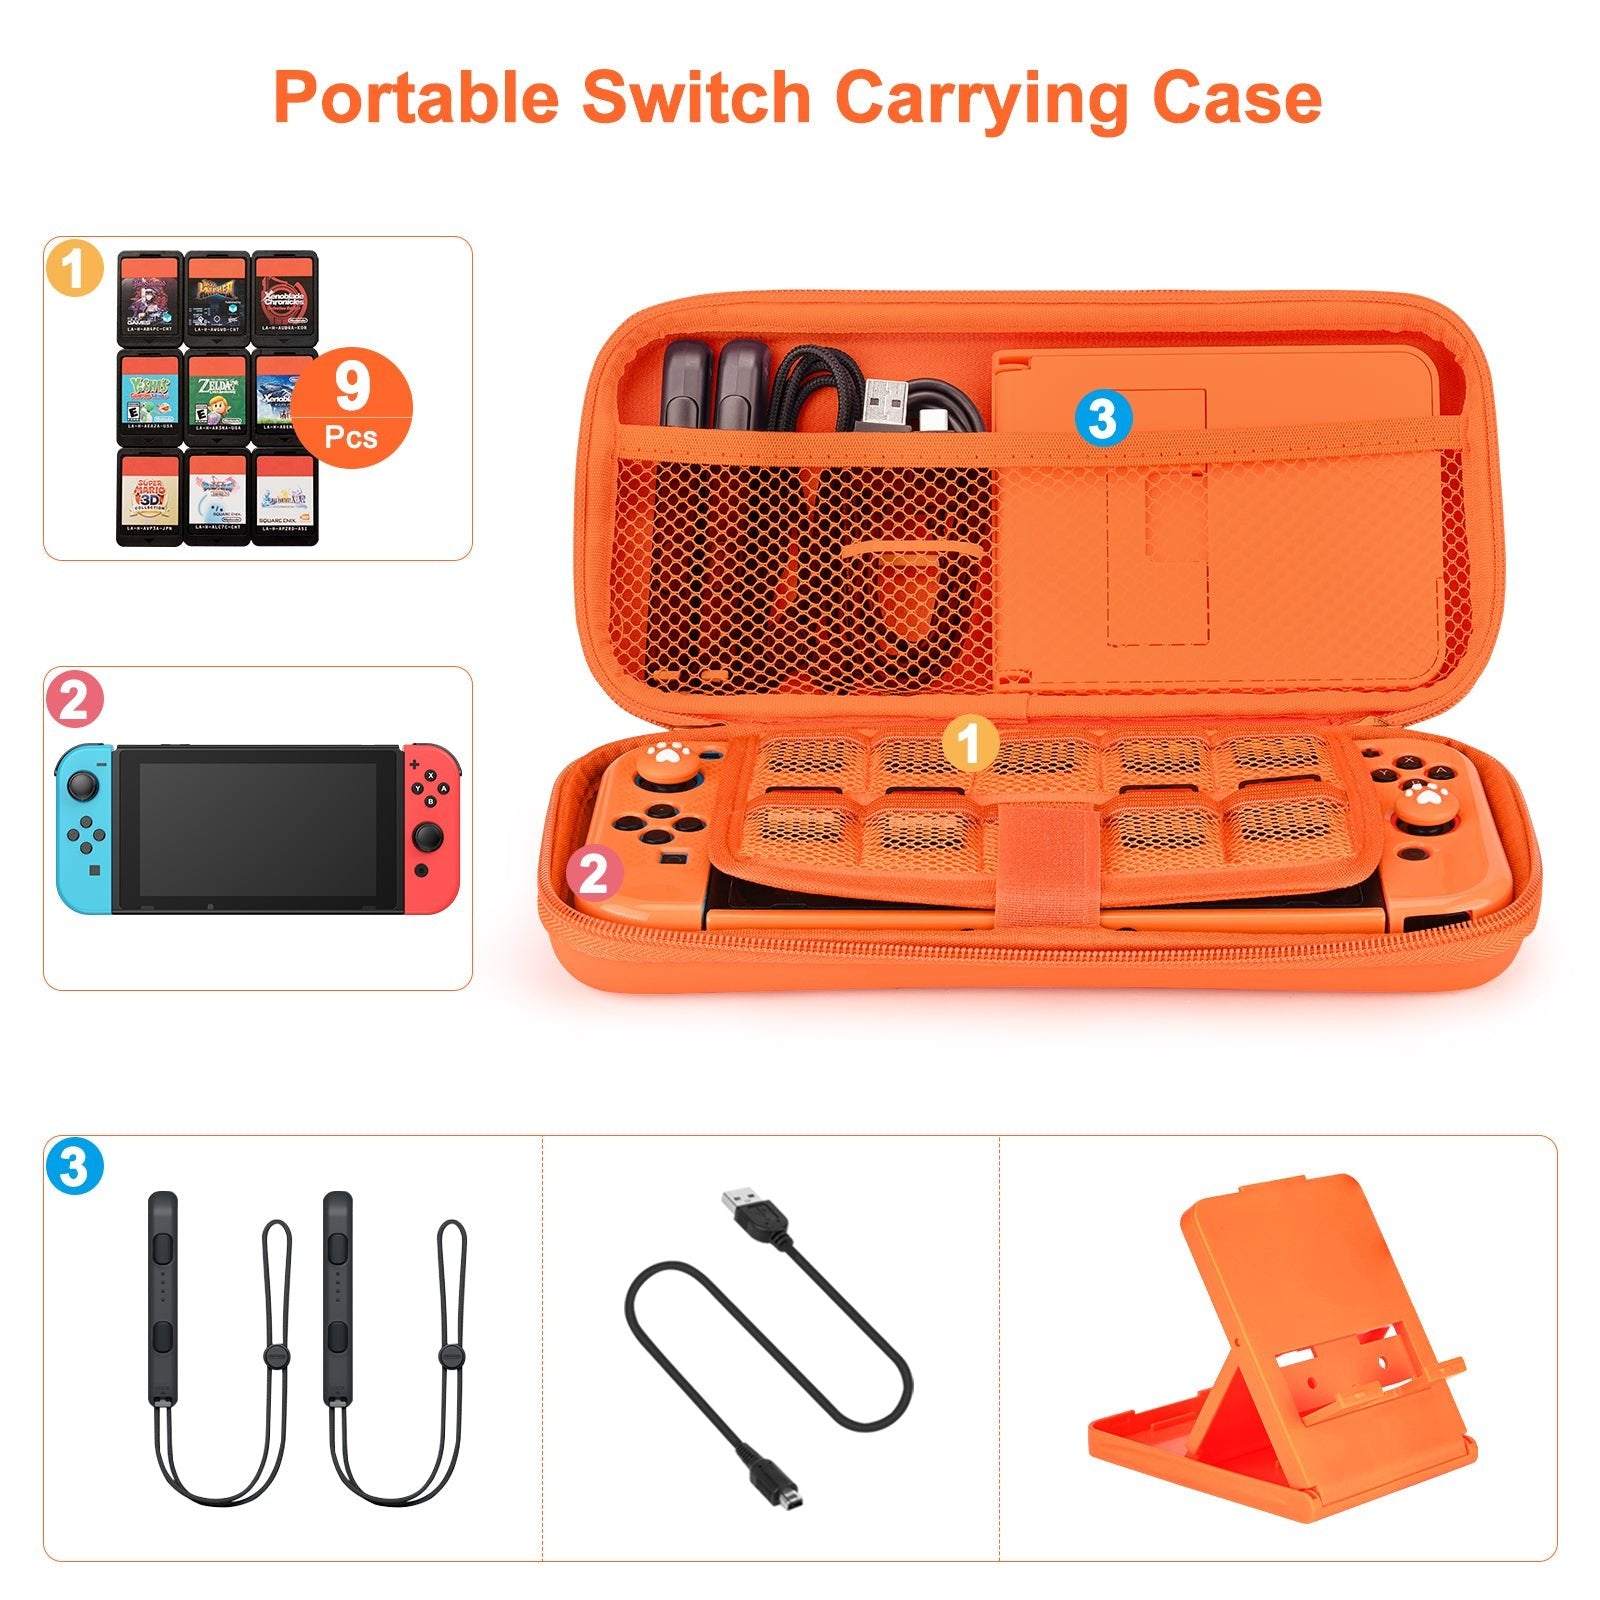 Younik Hard Switch Carrying Case, Thumb Grips for Nintendo Switch